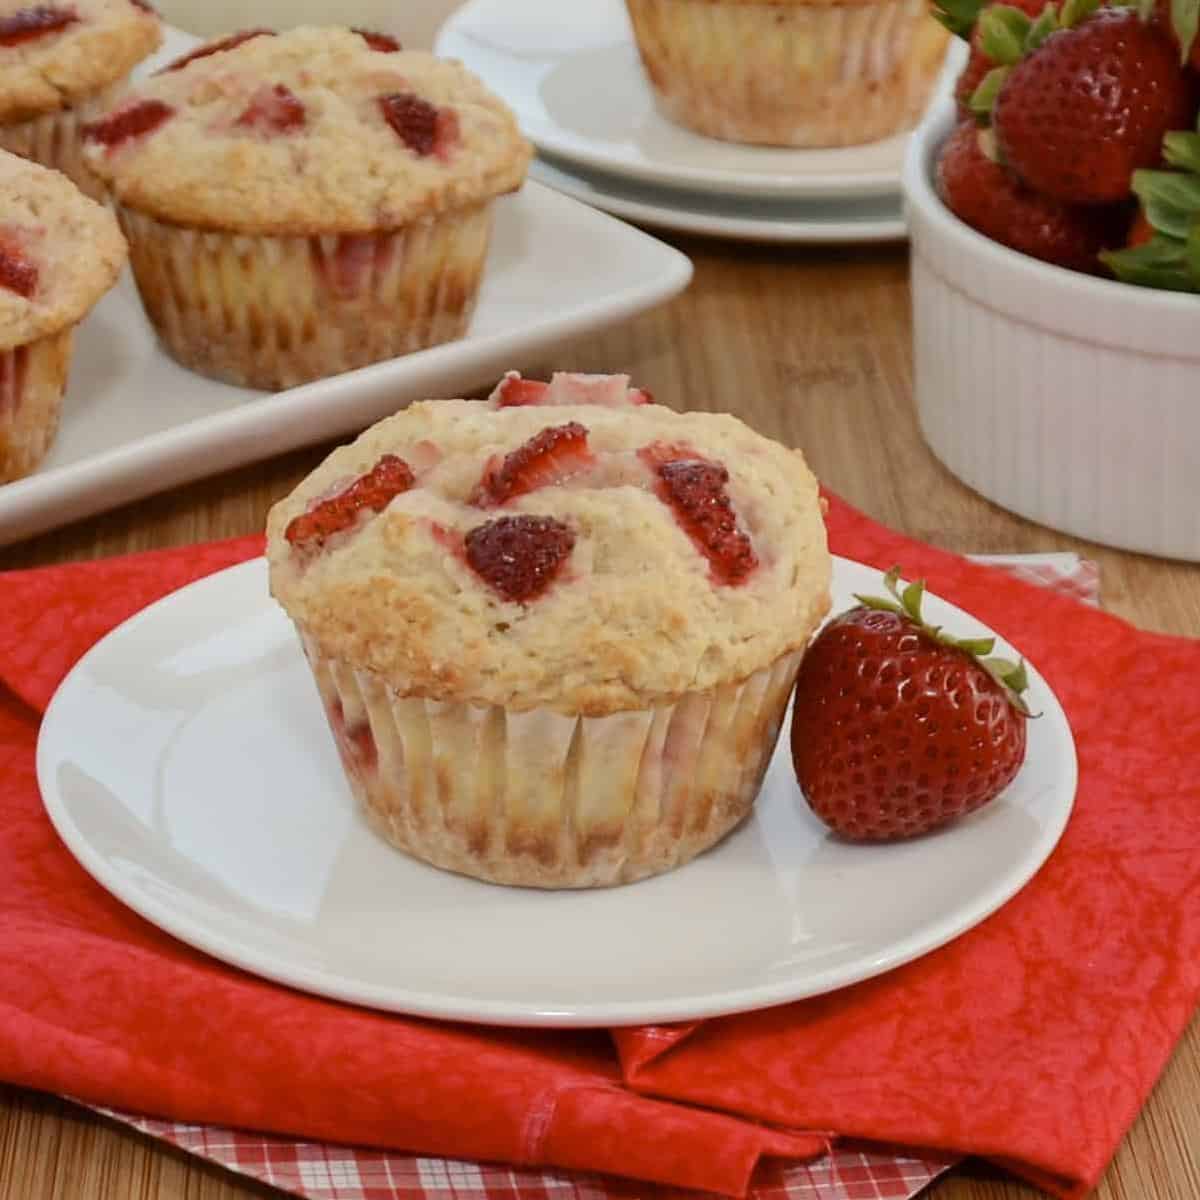  Top these muffins with a little bit of whipped cream and more strawberries for an extra touch of sweetness!